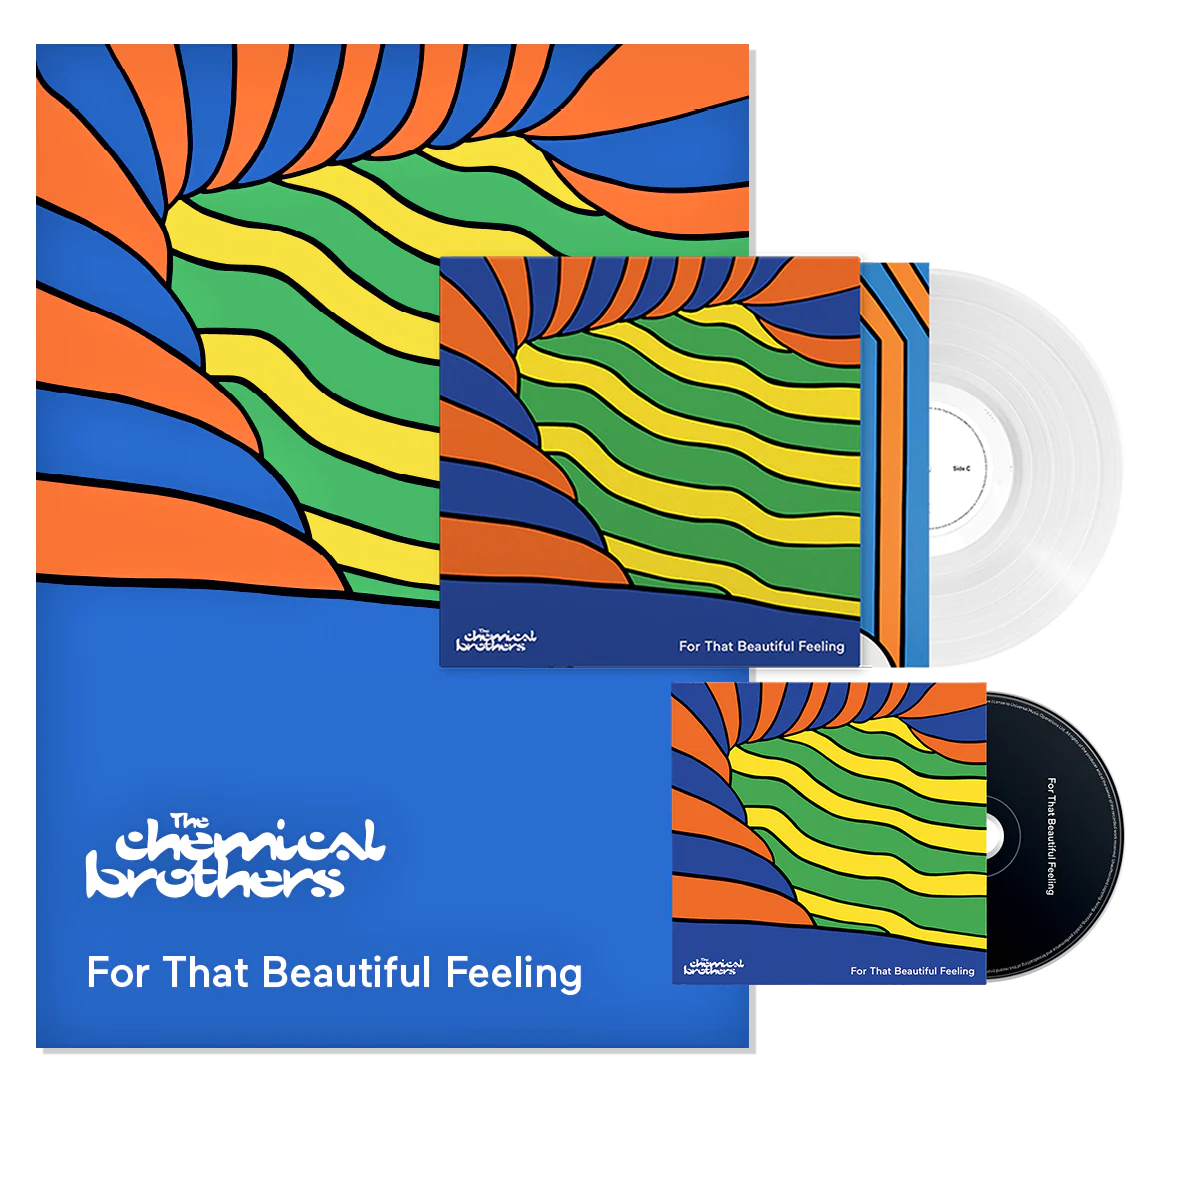 For That Beautiful Feeling: Limited White Vinyl 2LP, CD + Hand Numbered Art Print